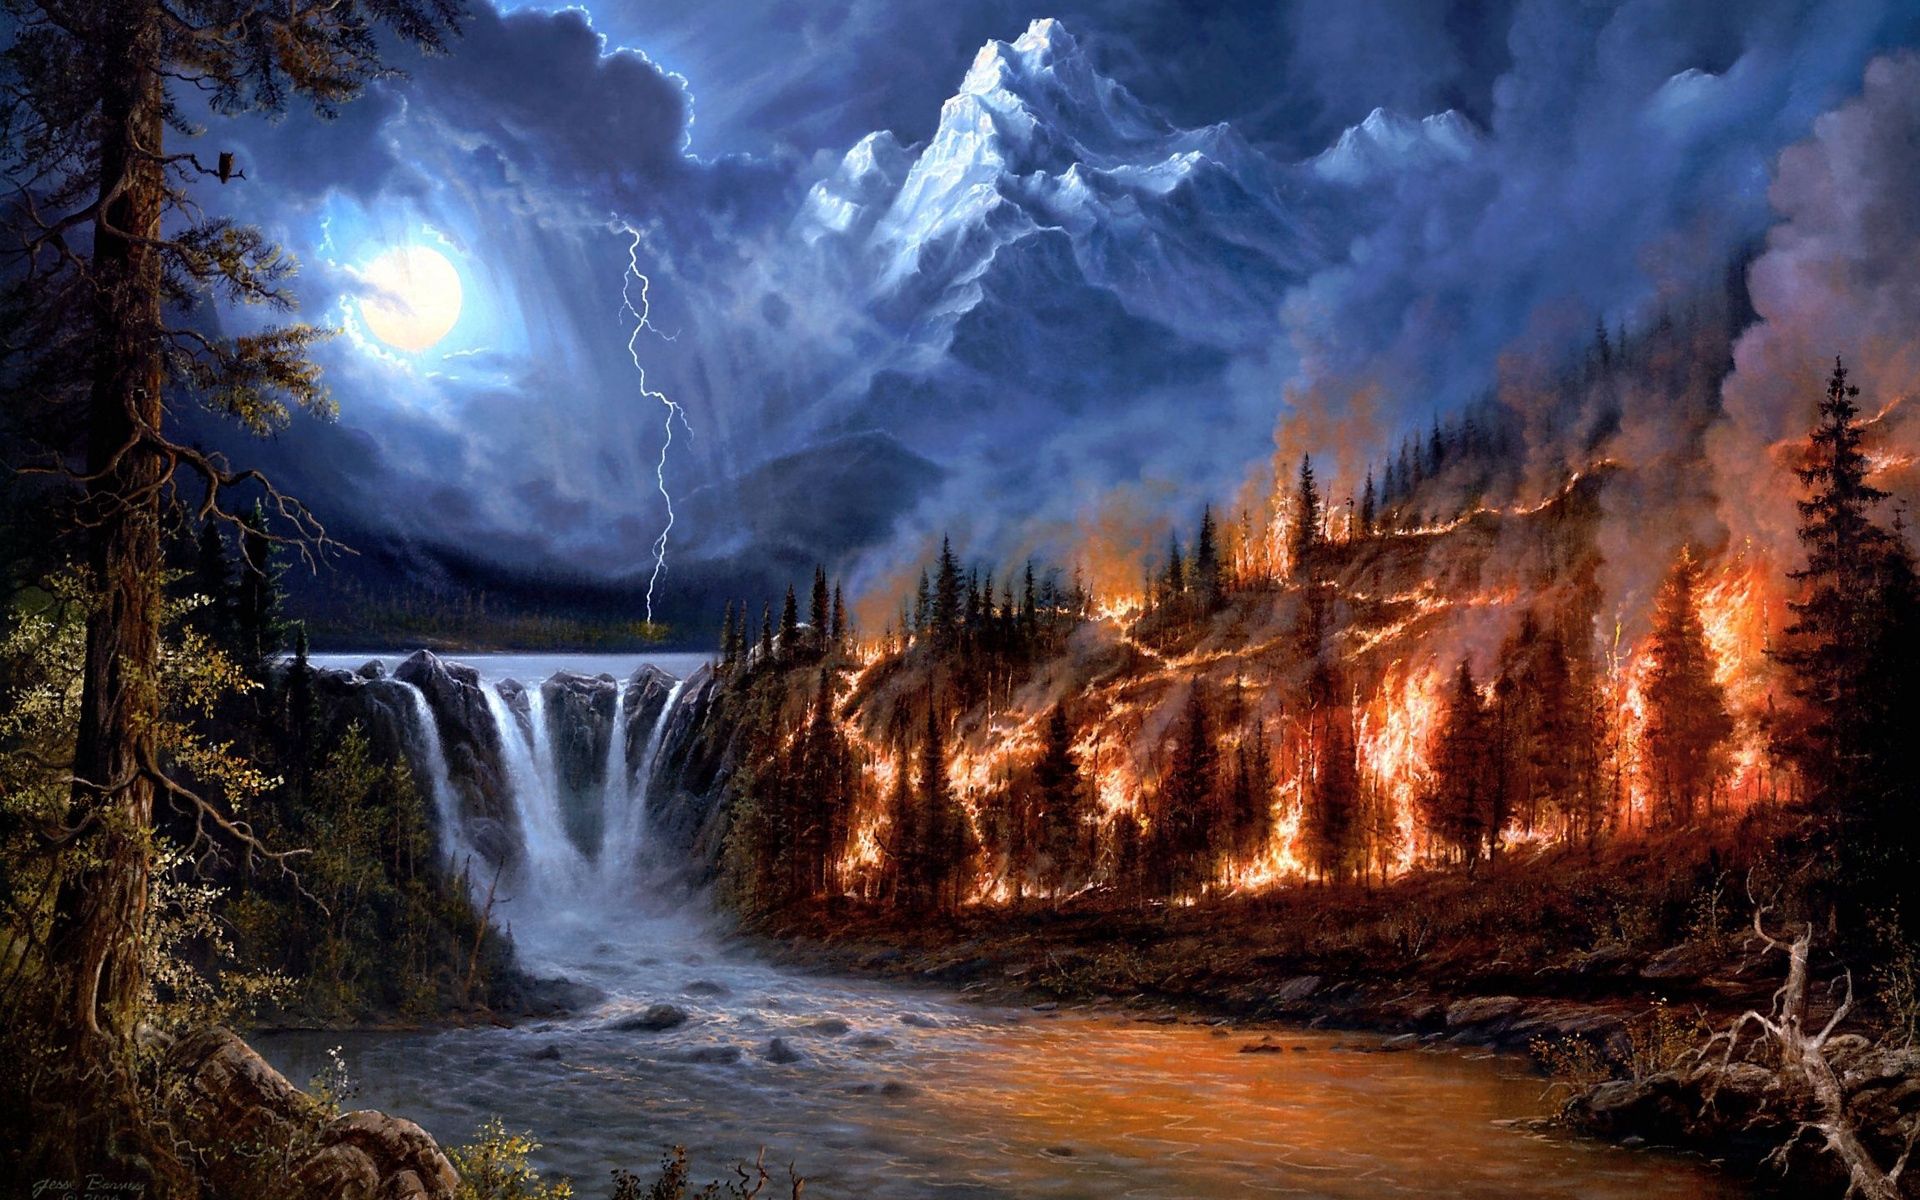 lightning, fire, nature, trees, mountains, night, moon, waterfalls, forest wallpaper for mobile